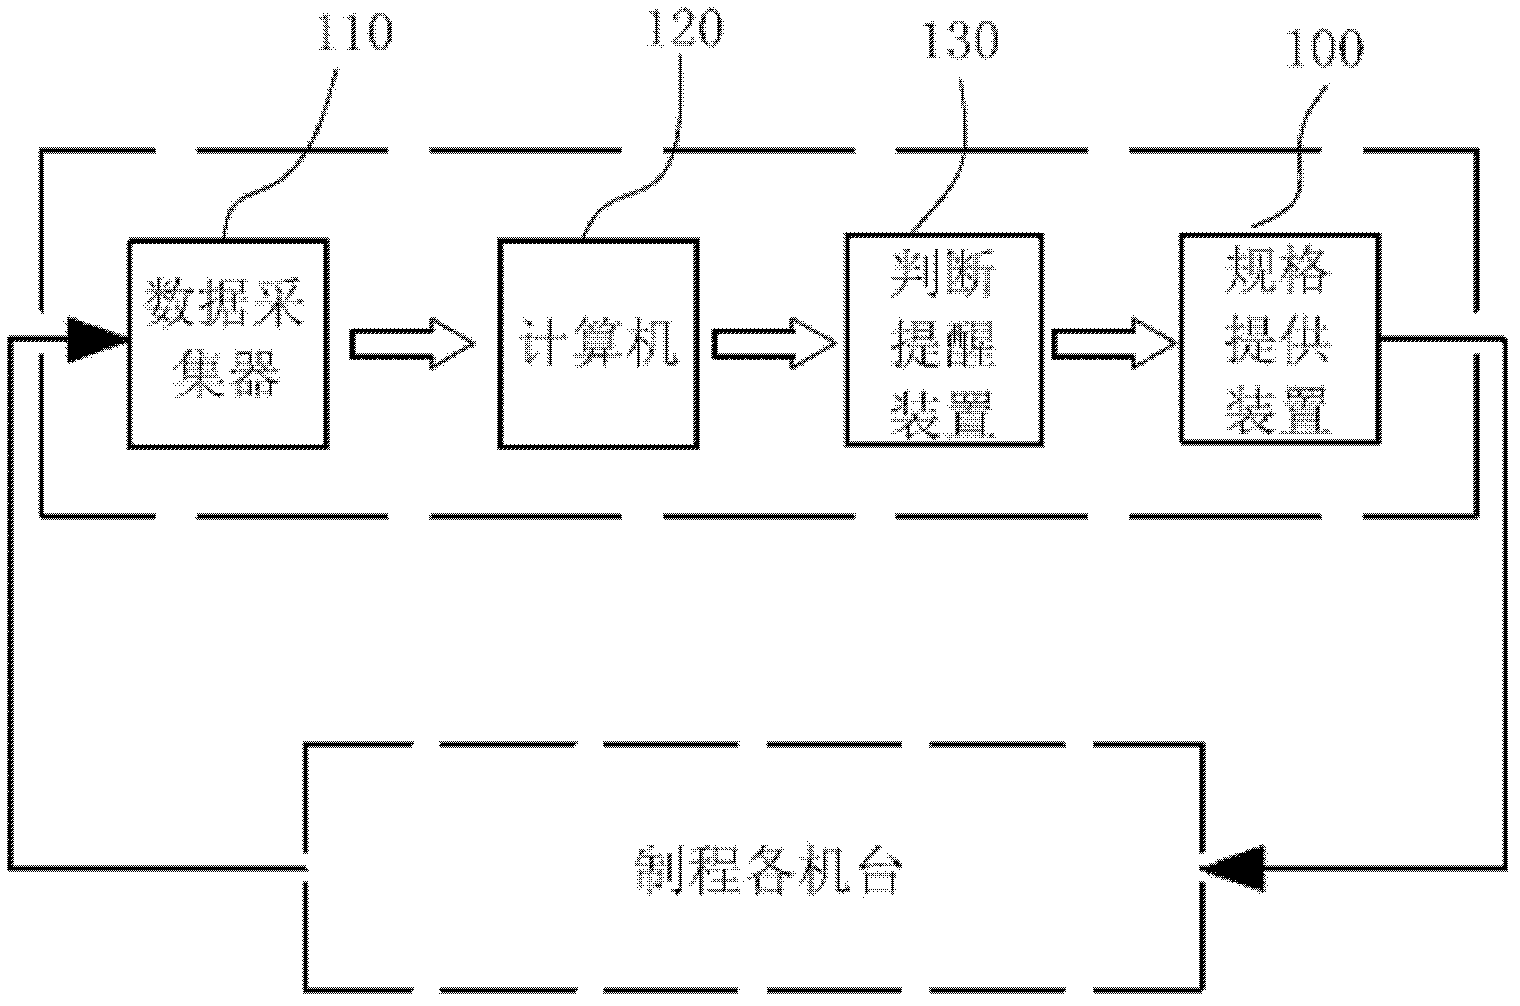 Semi-conductor processing management system and method